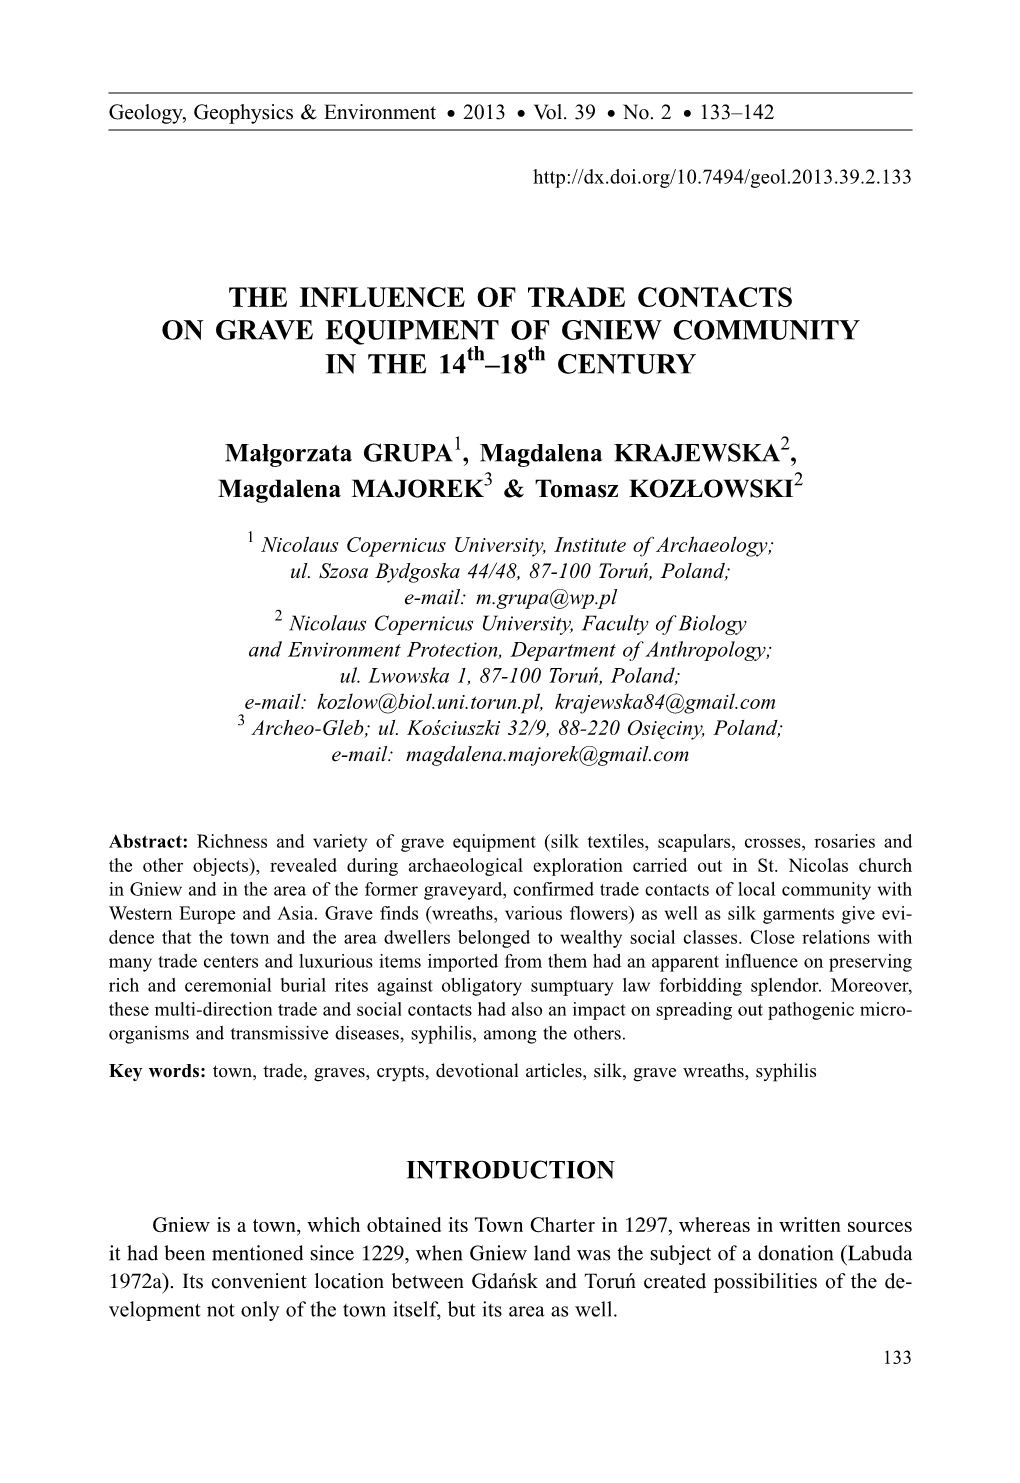 THE INFLUENCE of TRADE CONTACTS on GRAVE EQUIPMENT of GNIEW COMMUNITY in the 14Th–18Th CENTURY